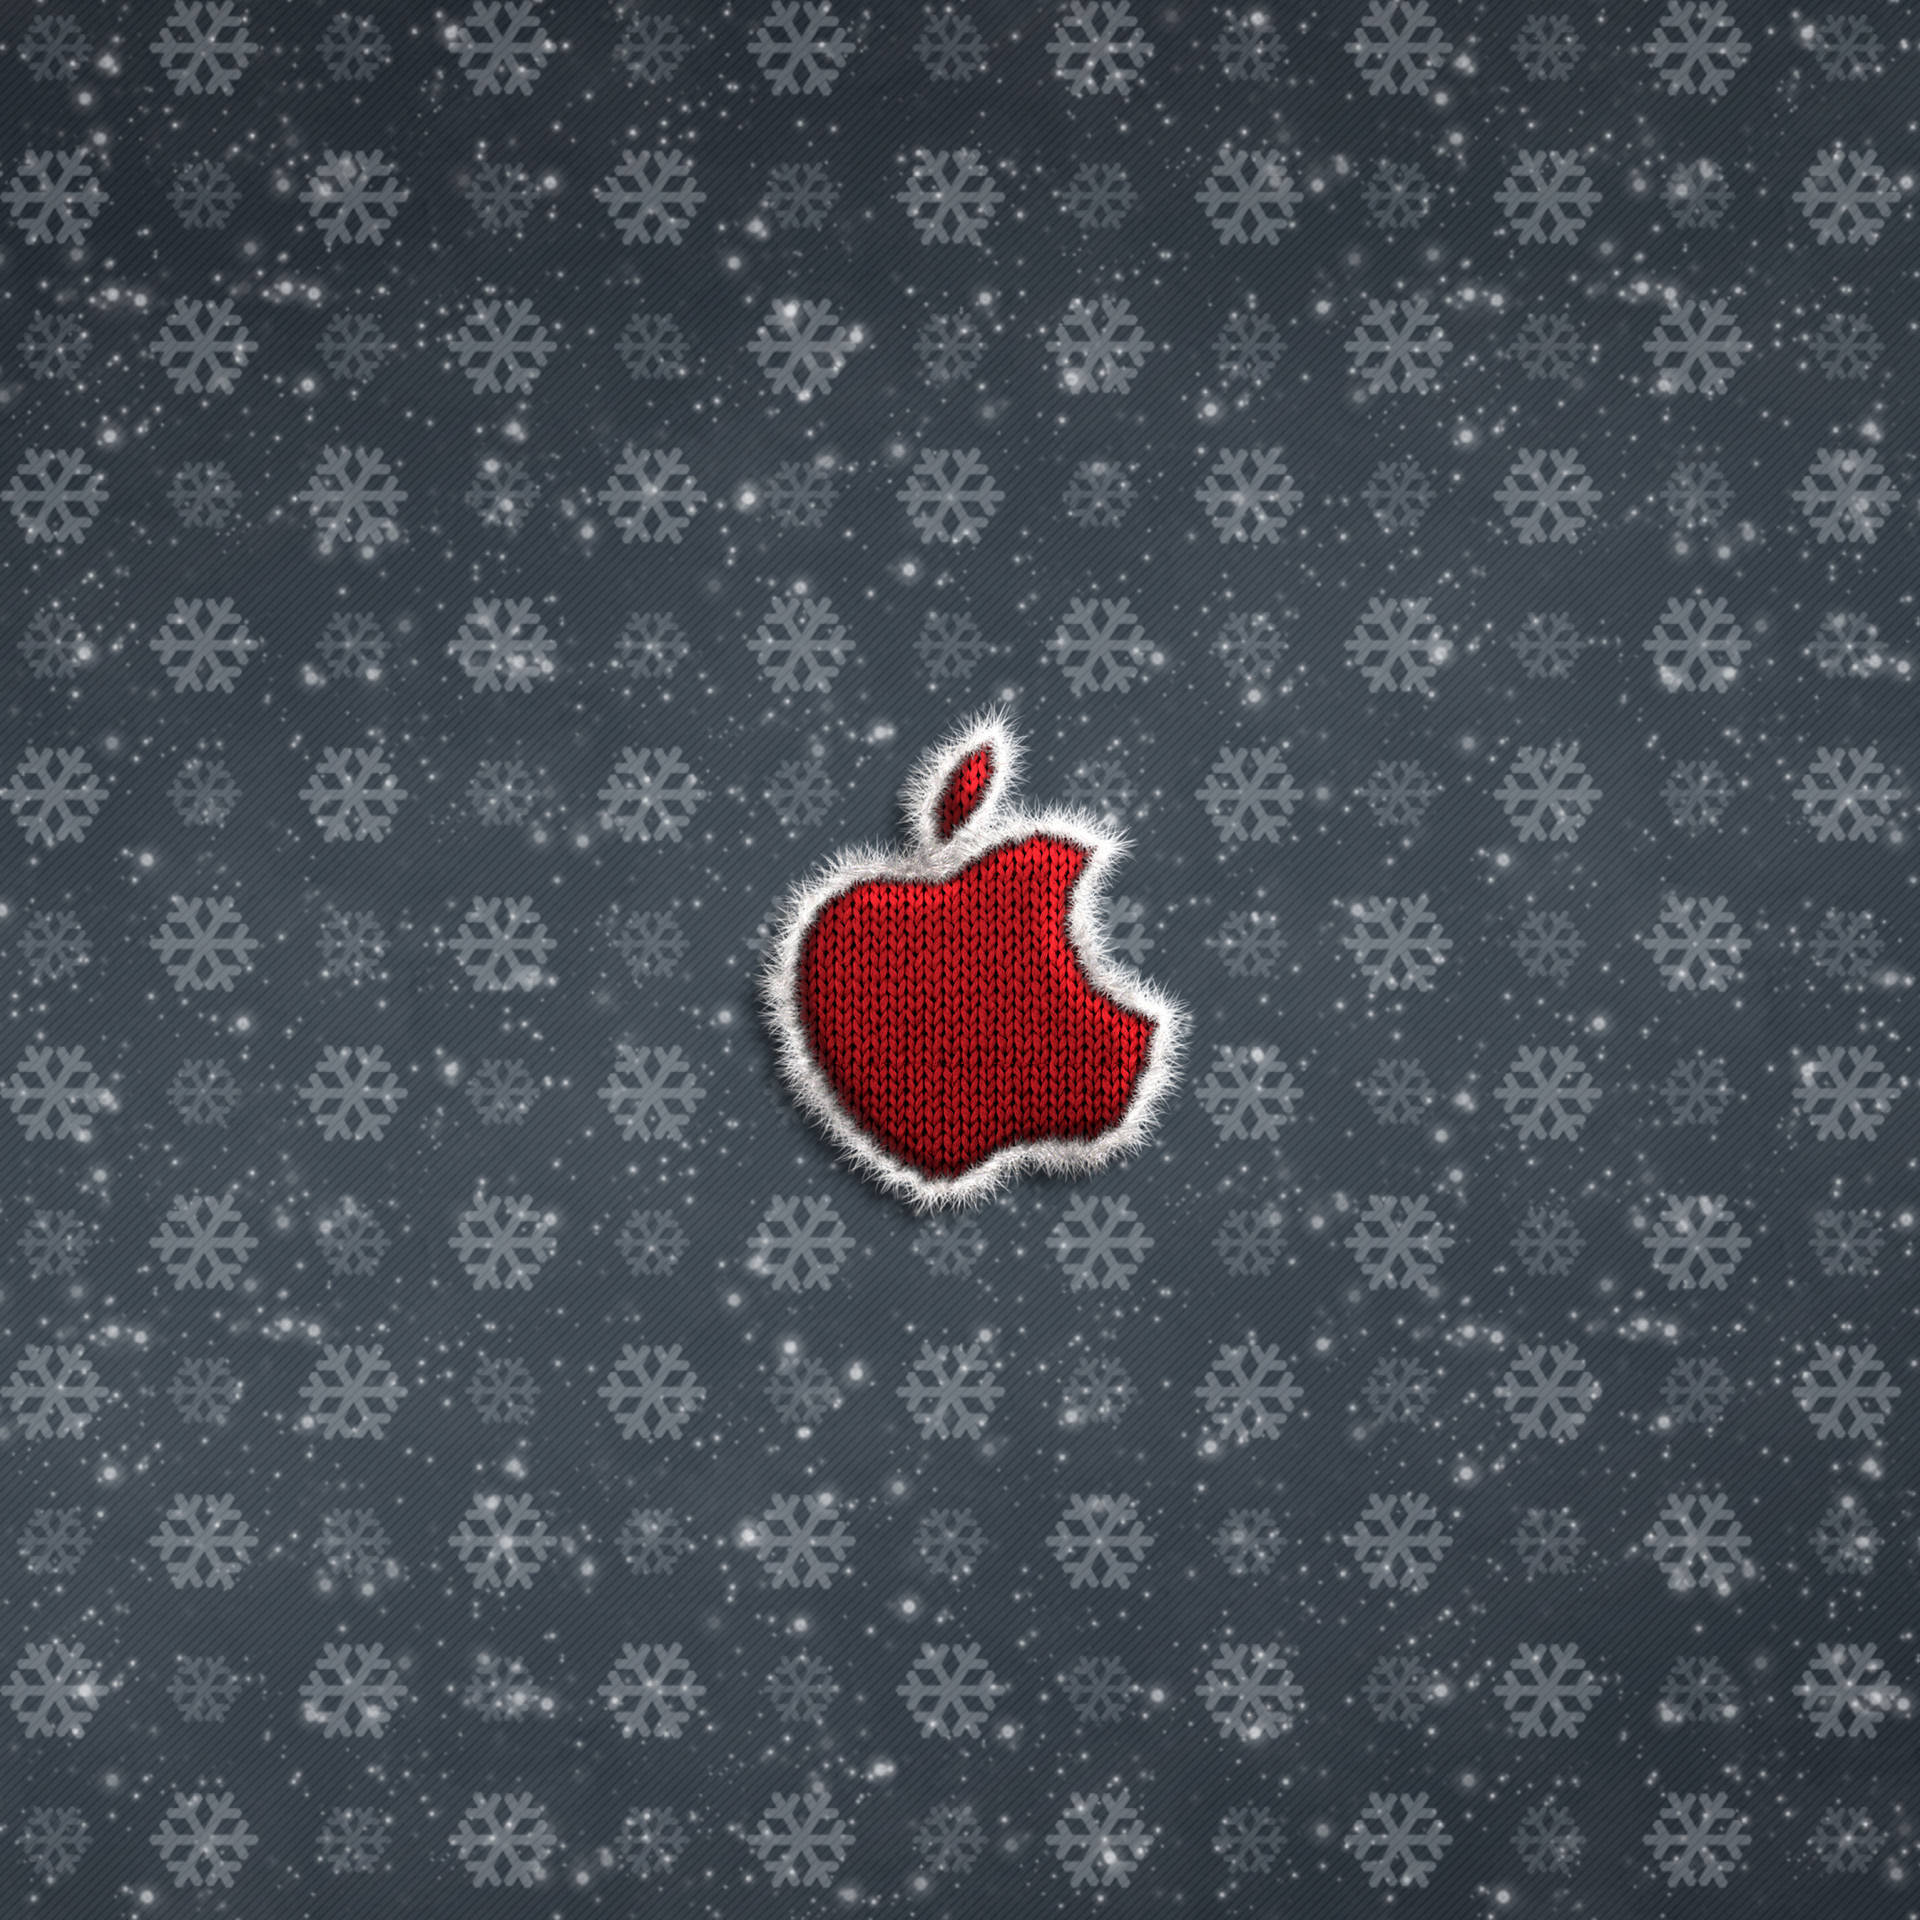 Embroidered Apple Logo 4k Picture